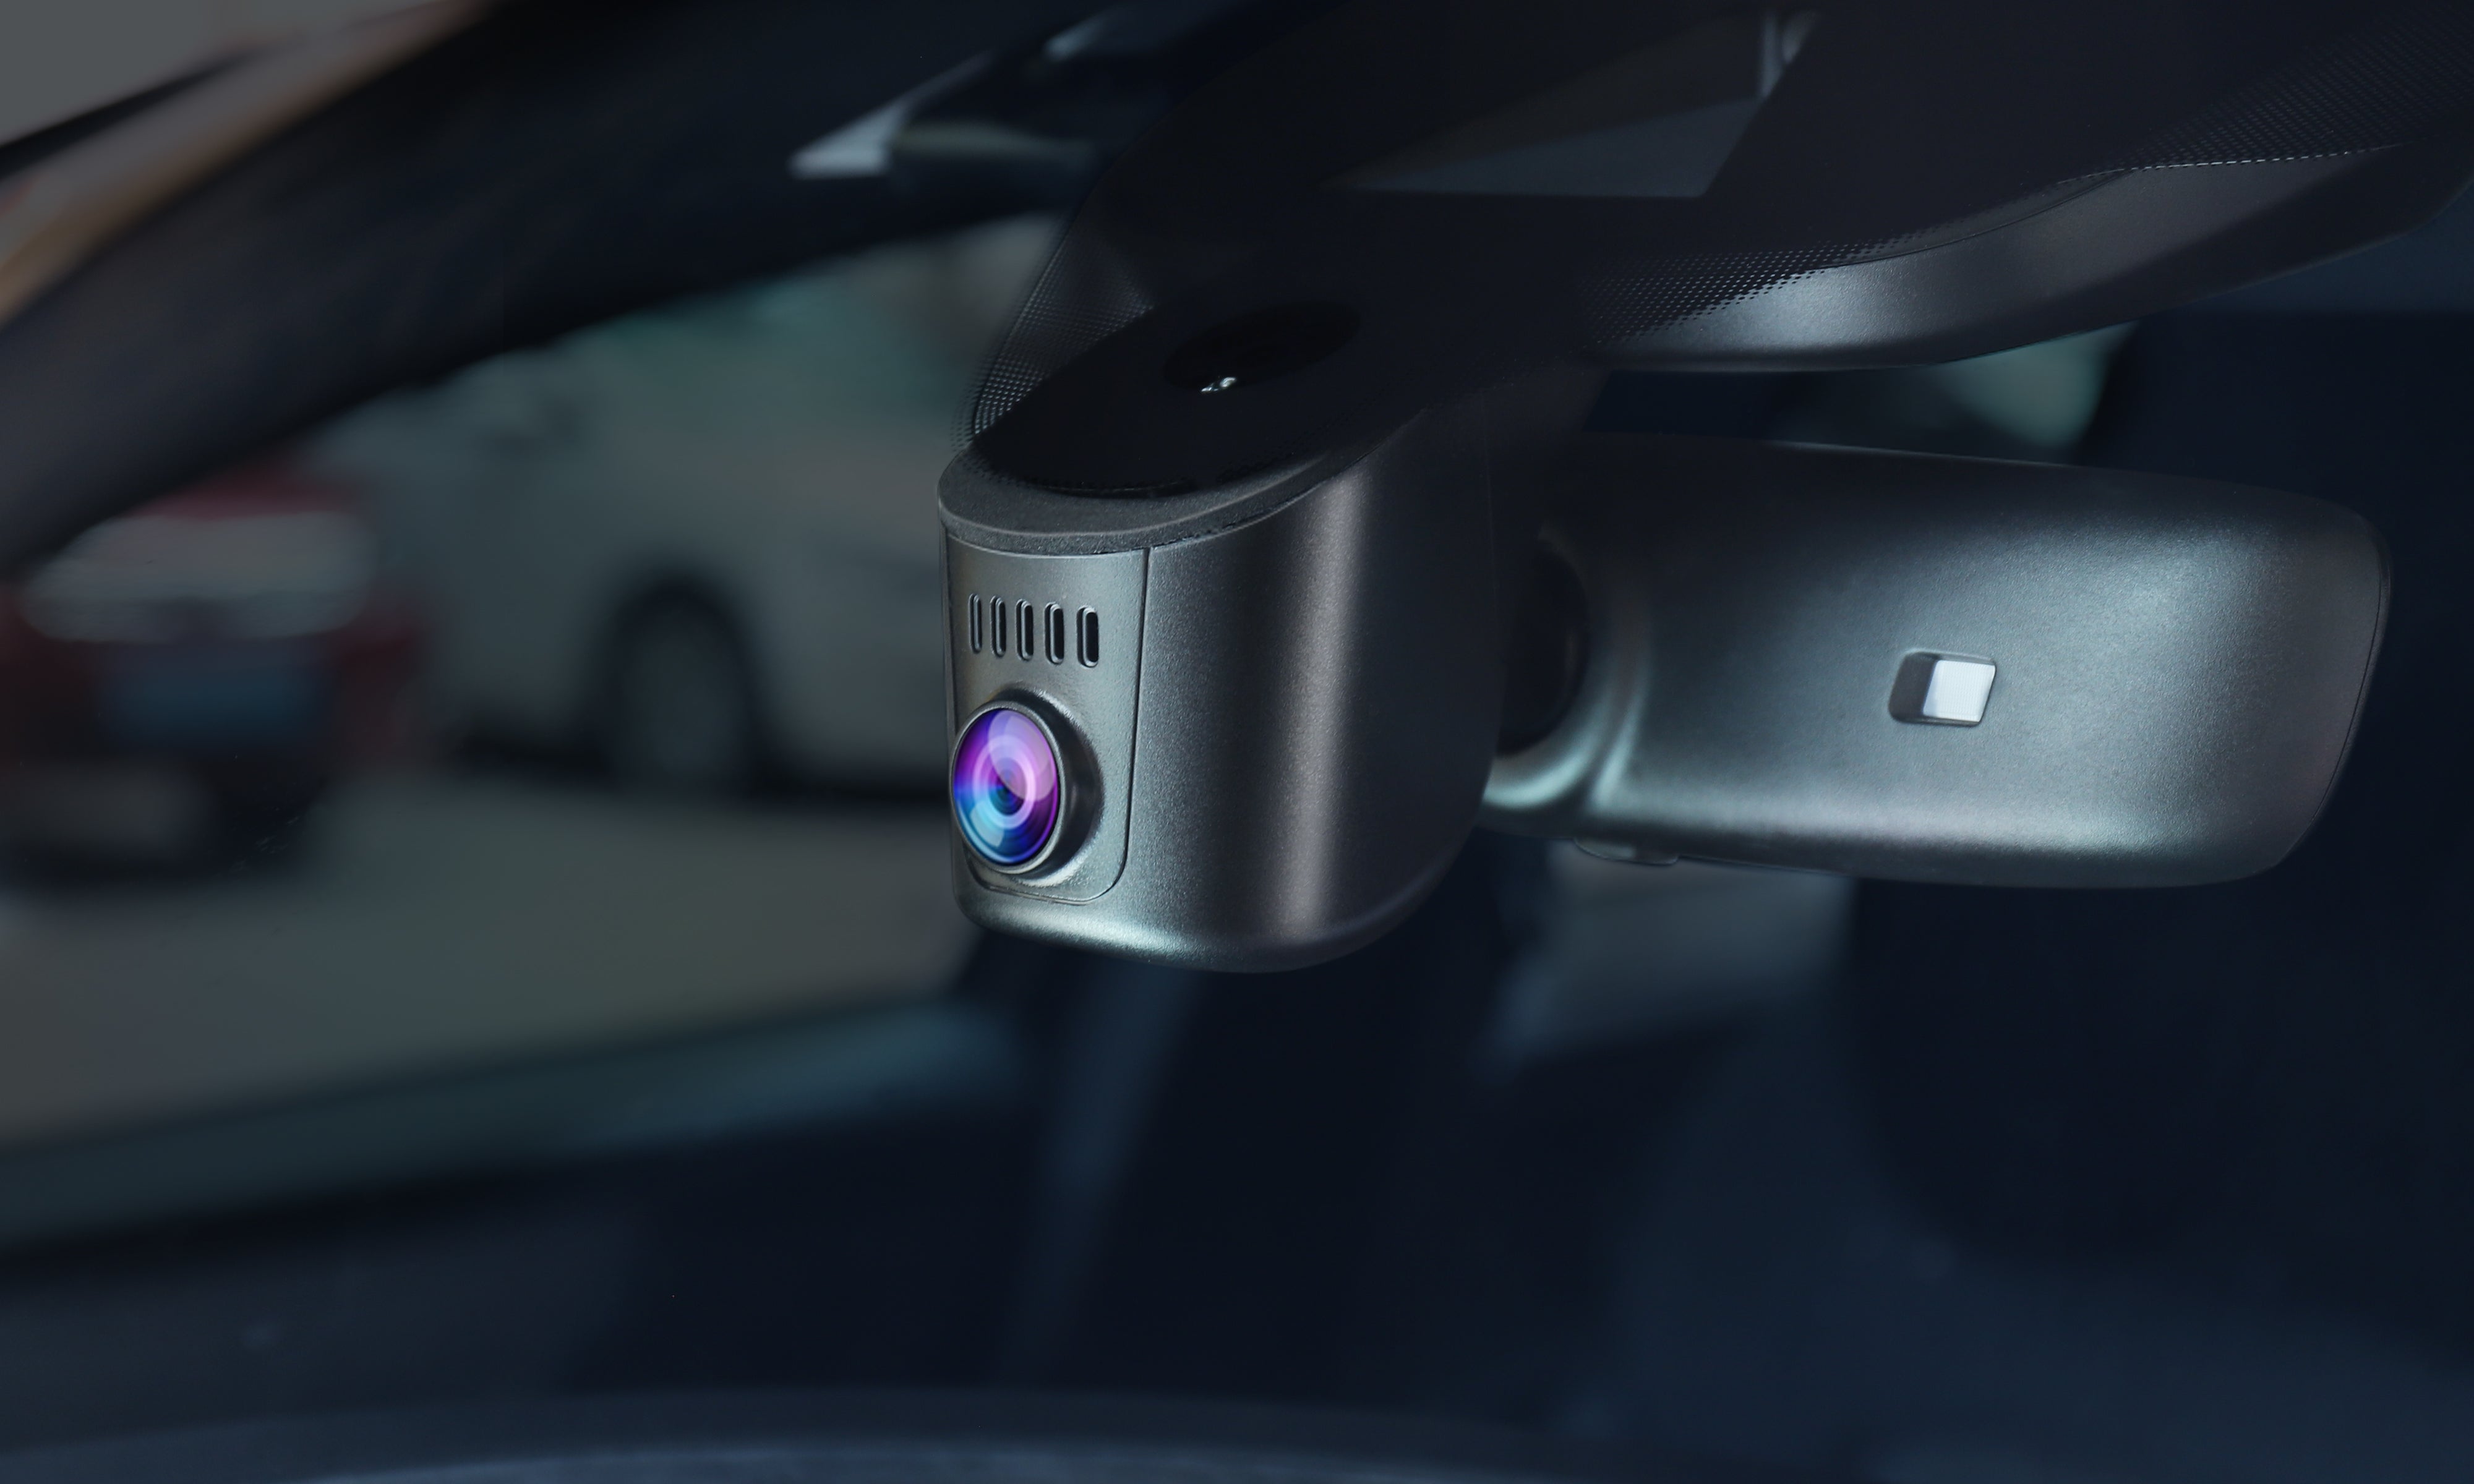 BEST DASH CAM FOR CAR. ONLY RS 3500 PRICE WITH EASY FIT 